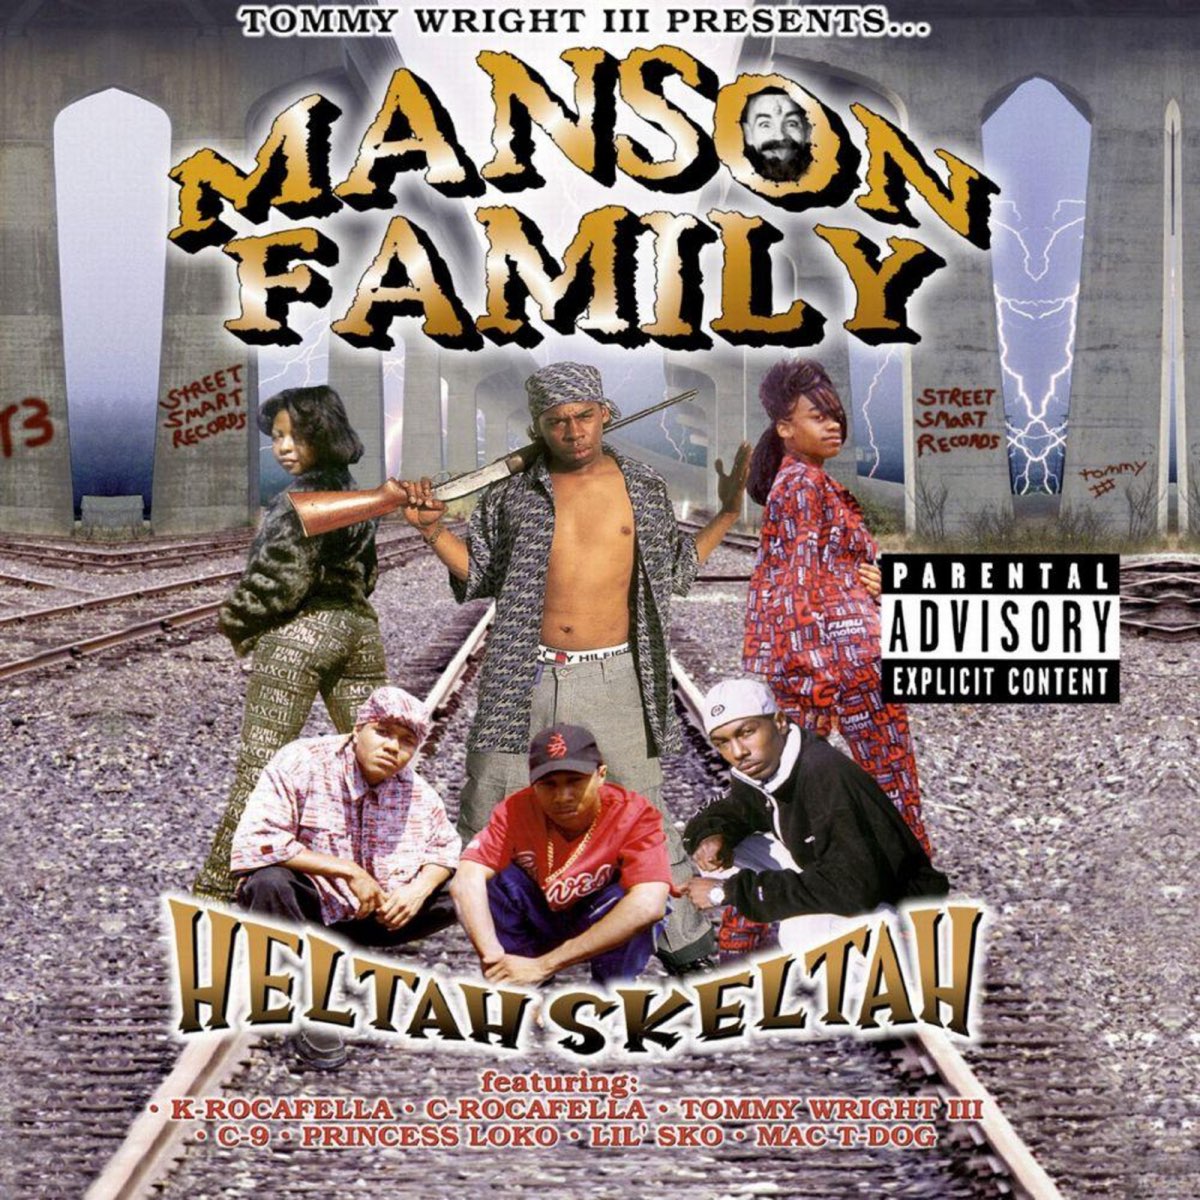 Heltah Skeltah (Tommy Wright III Presents) by Manson Family on Apple Music